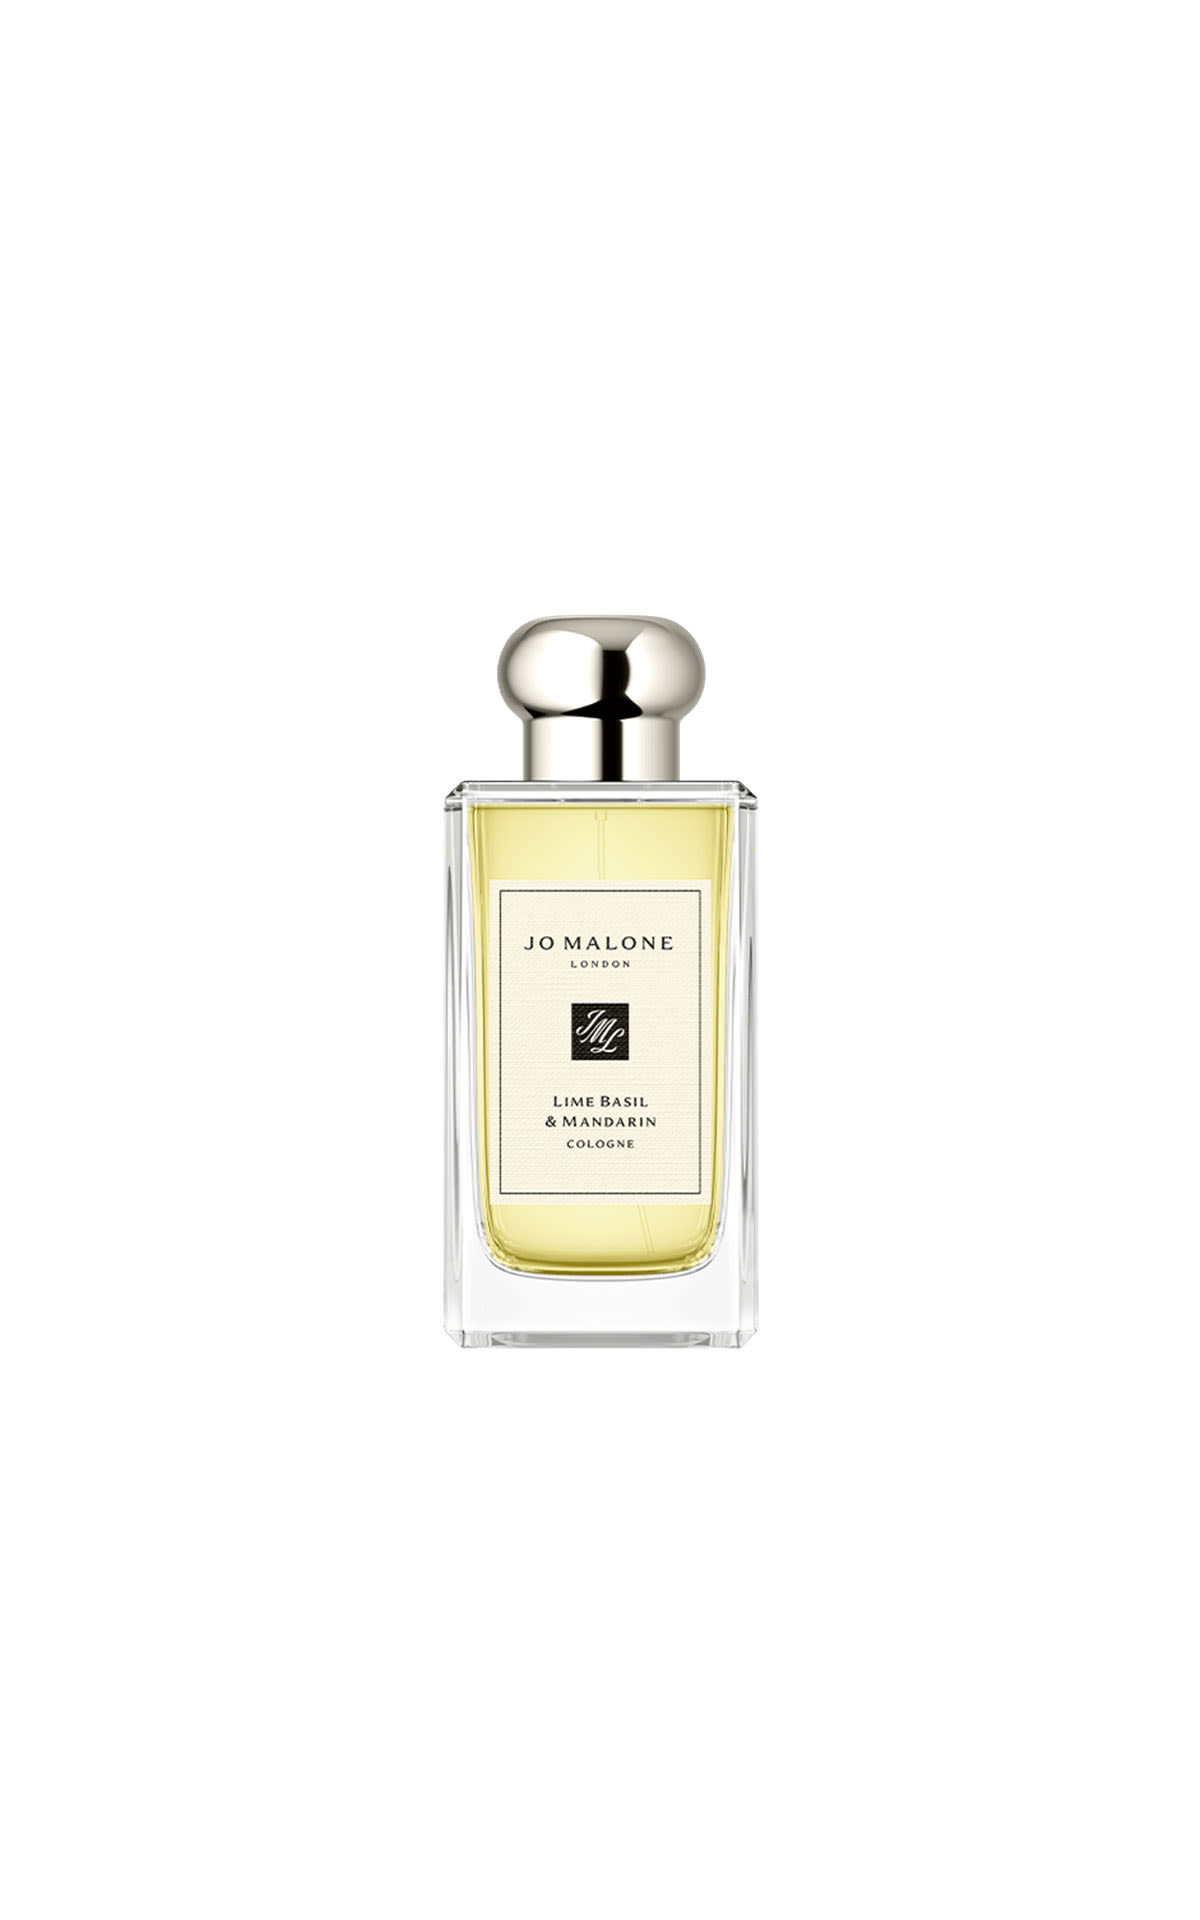 Jo Malone Lime basil and mandarin cologne 100ml from Bicester Village